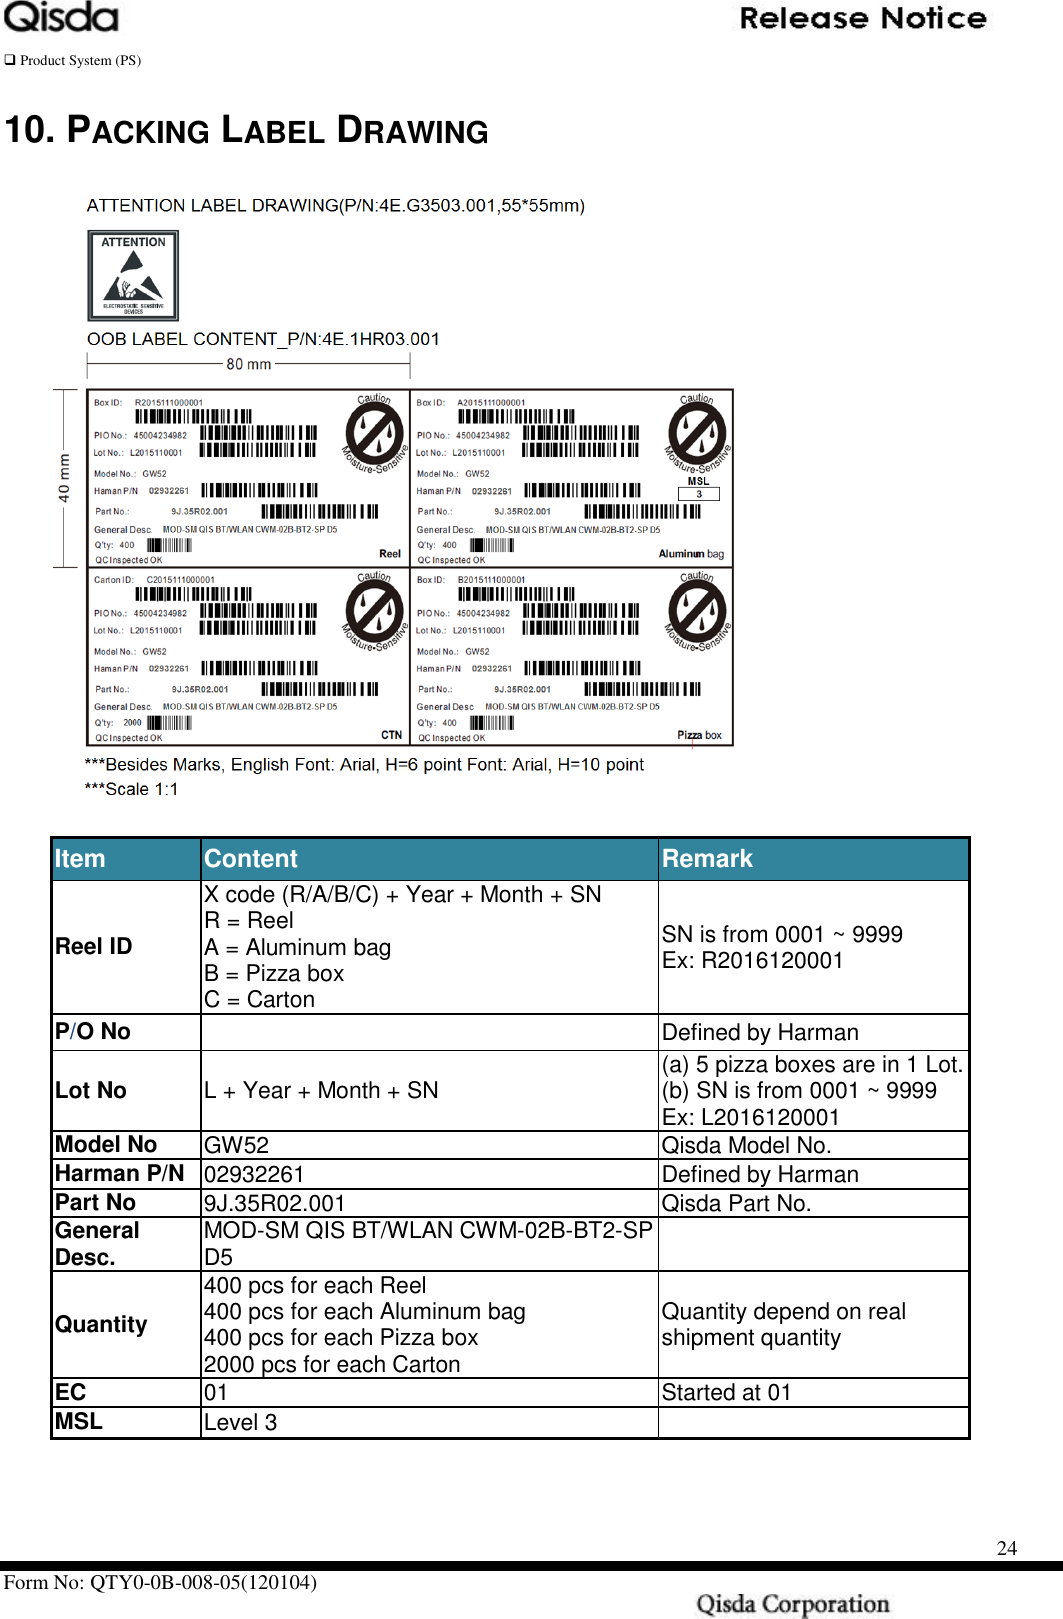   Product System (PS)      Form No: QTY0-0B-008-05(120104)                                                    24 10. PACKING LABEL DRAWING     Item Content Remark Reel ID X code (R/A/B/C) + Year + Month + SN R = Reel A = Aluminum bag B = Pizza box C = Carton SN is from 0001 ~ 9999 Ex: R2016120001 P/O No  Defined by Harman Lot No L + Year + Month + SN (a) 5 pizza boxes are in 1 Lot. (b) SN is from 0001 ~ 9999 Ex: L2016120001 Model No GW52 Qisda Model No. Harman P/N 02932261 Defined by Harman Part No 9J.35R02.001 Qisda Part No. General Desc. MOD-SM QIS BT/WLAN CWM-02B-BT2-SP D5   Quantity 400 pcs for each Reel 400 pcs for each Aluminum bag 400 pcs for each Pizza box 2000 pcs for each Carton Quantity depend on real shipment quantity EC 01 Started at 01   MSL Level 3    